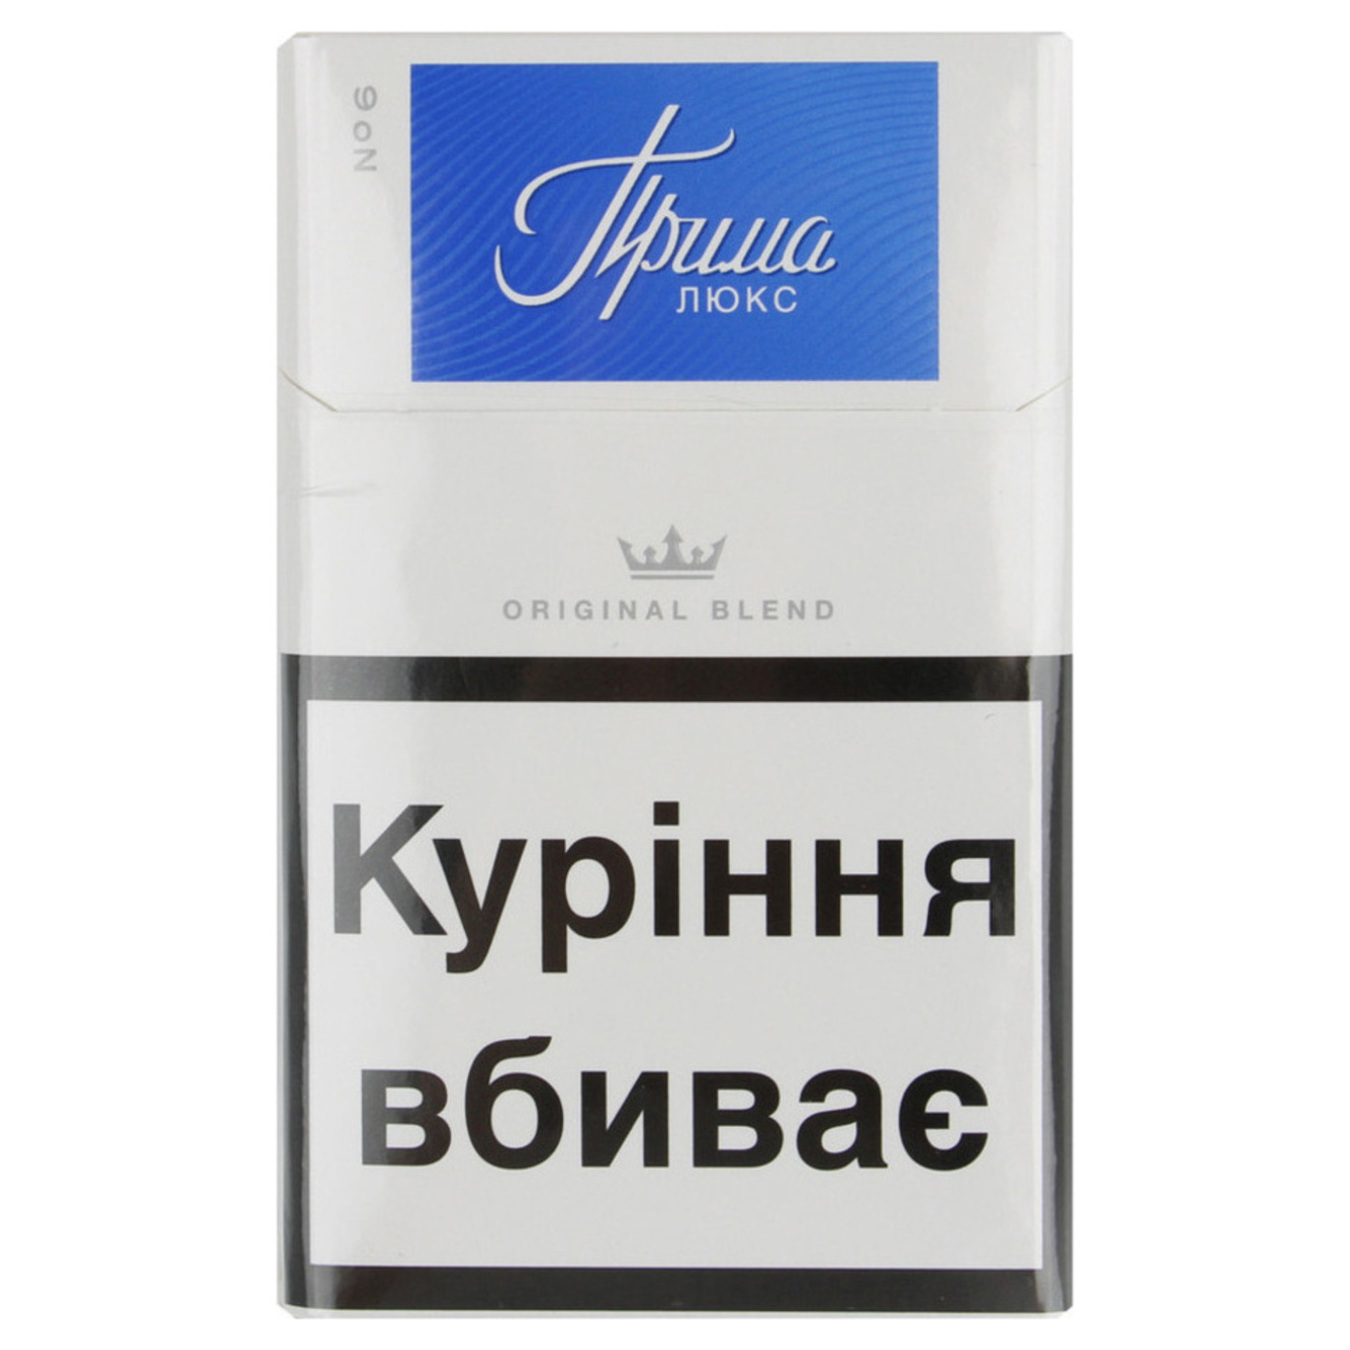 Prima Lux Cigarettes 20 pcs (the price is indicated without excise tax)